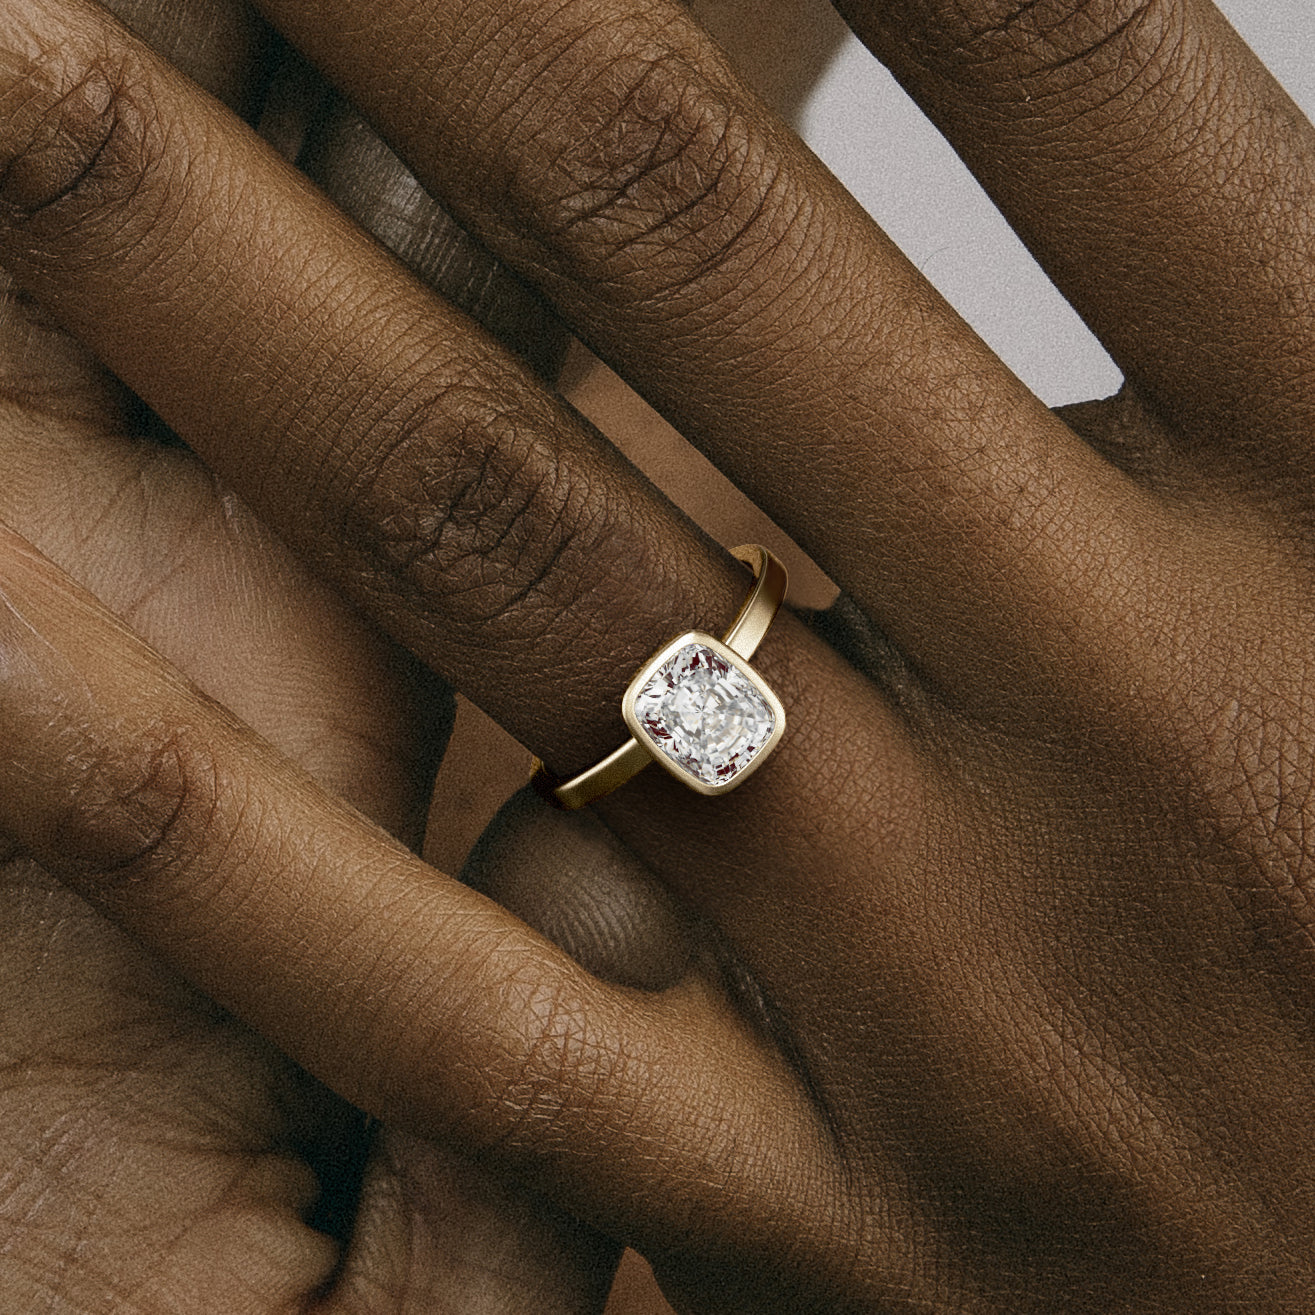 Mana Flat Band with Cushion Contemporary Engagement Ring Setting in 14 karat yellow, white, or rose Gold or platinum handmade by SHW Fine Jewelry NYC